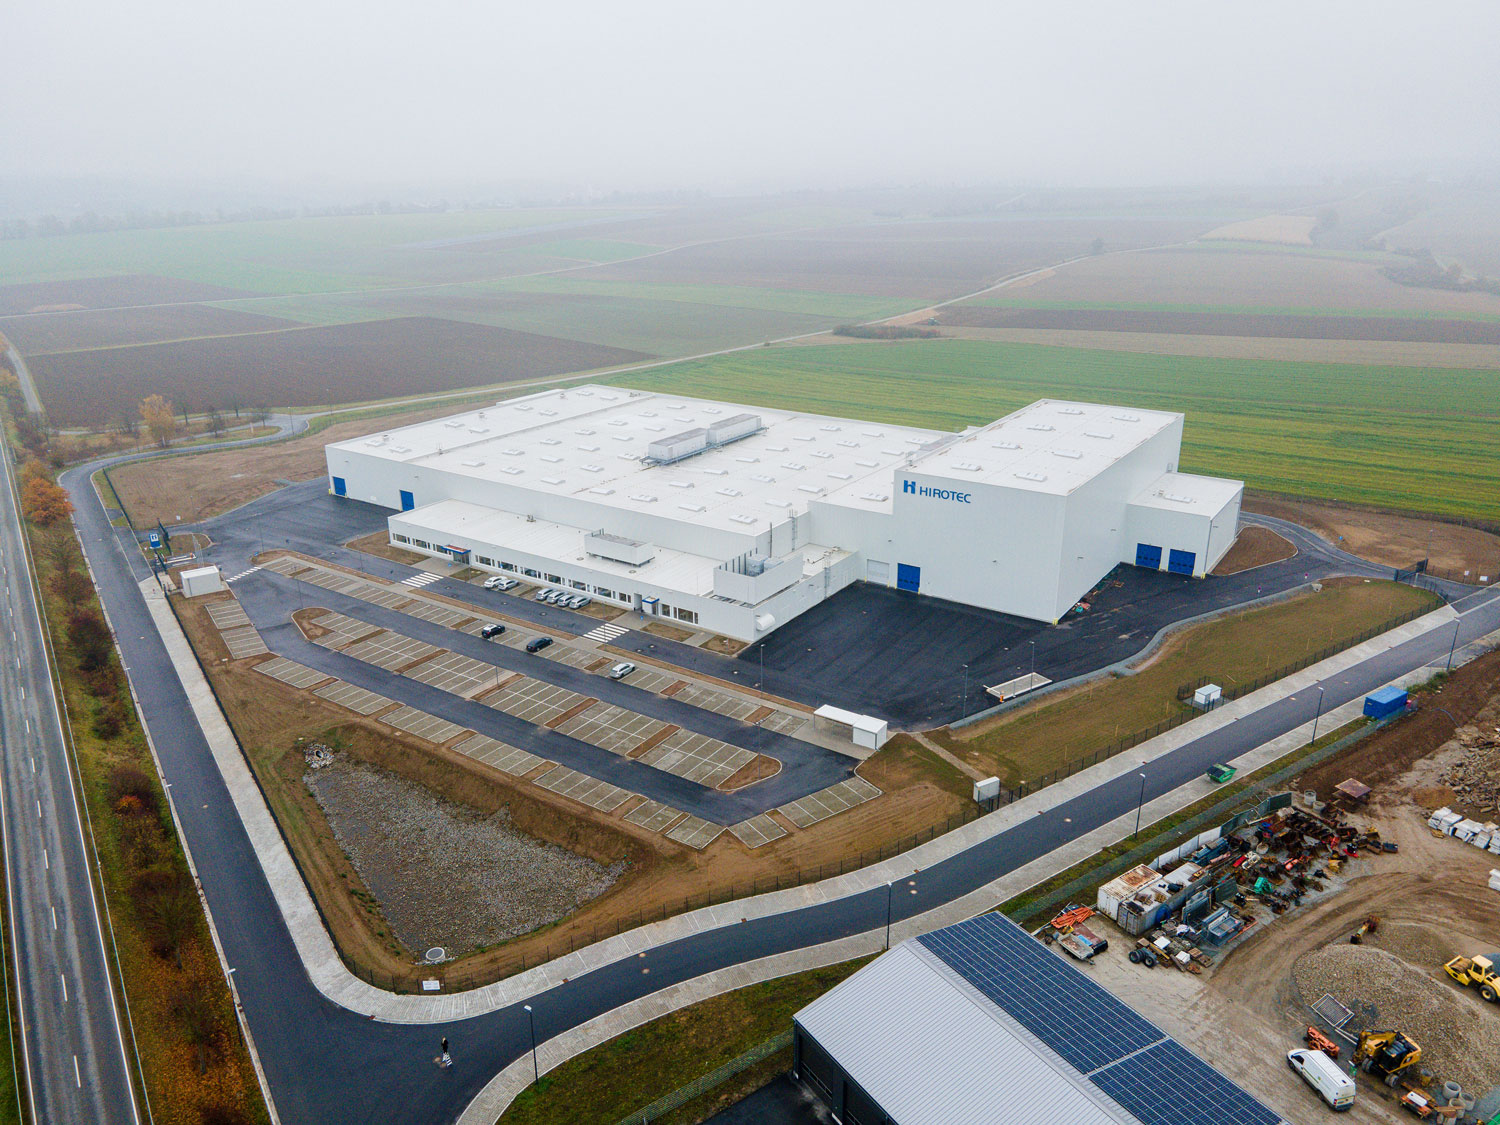 View on HIROTEC Stamping Plant in Germany, part of more than 1500 projects from Takenaka